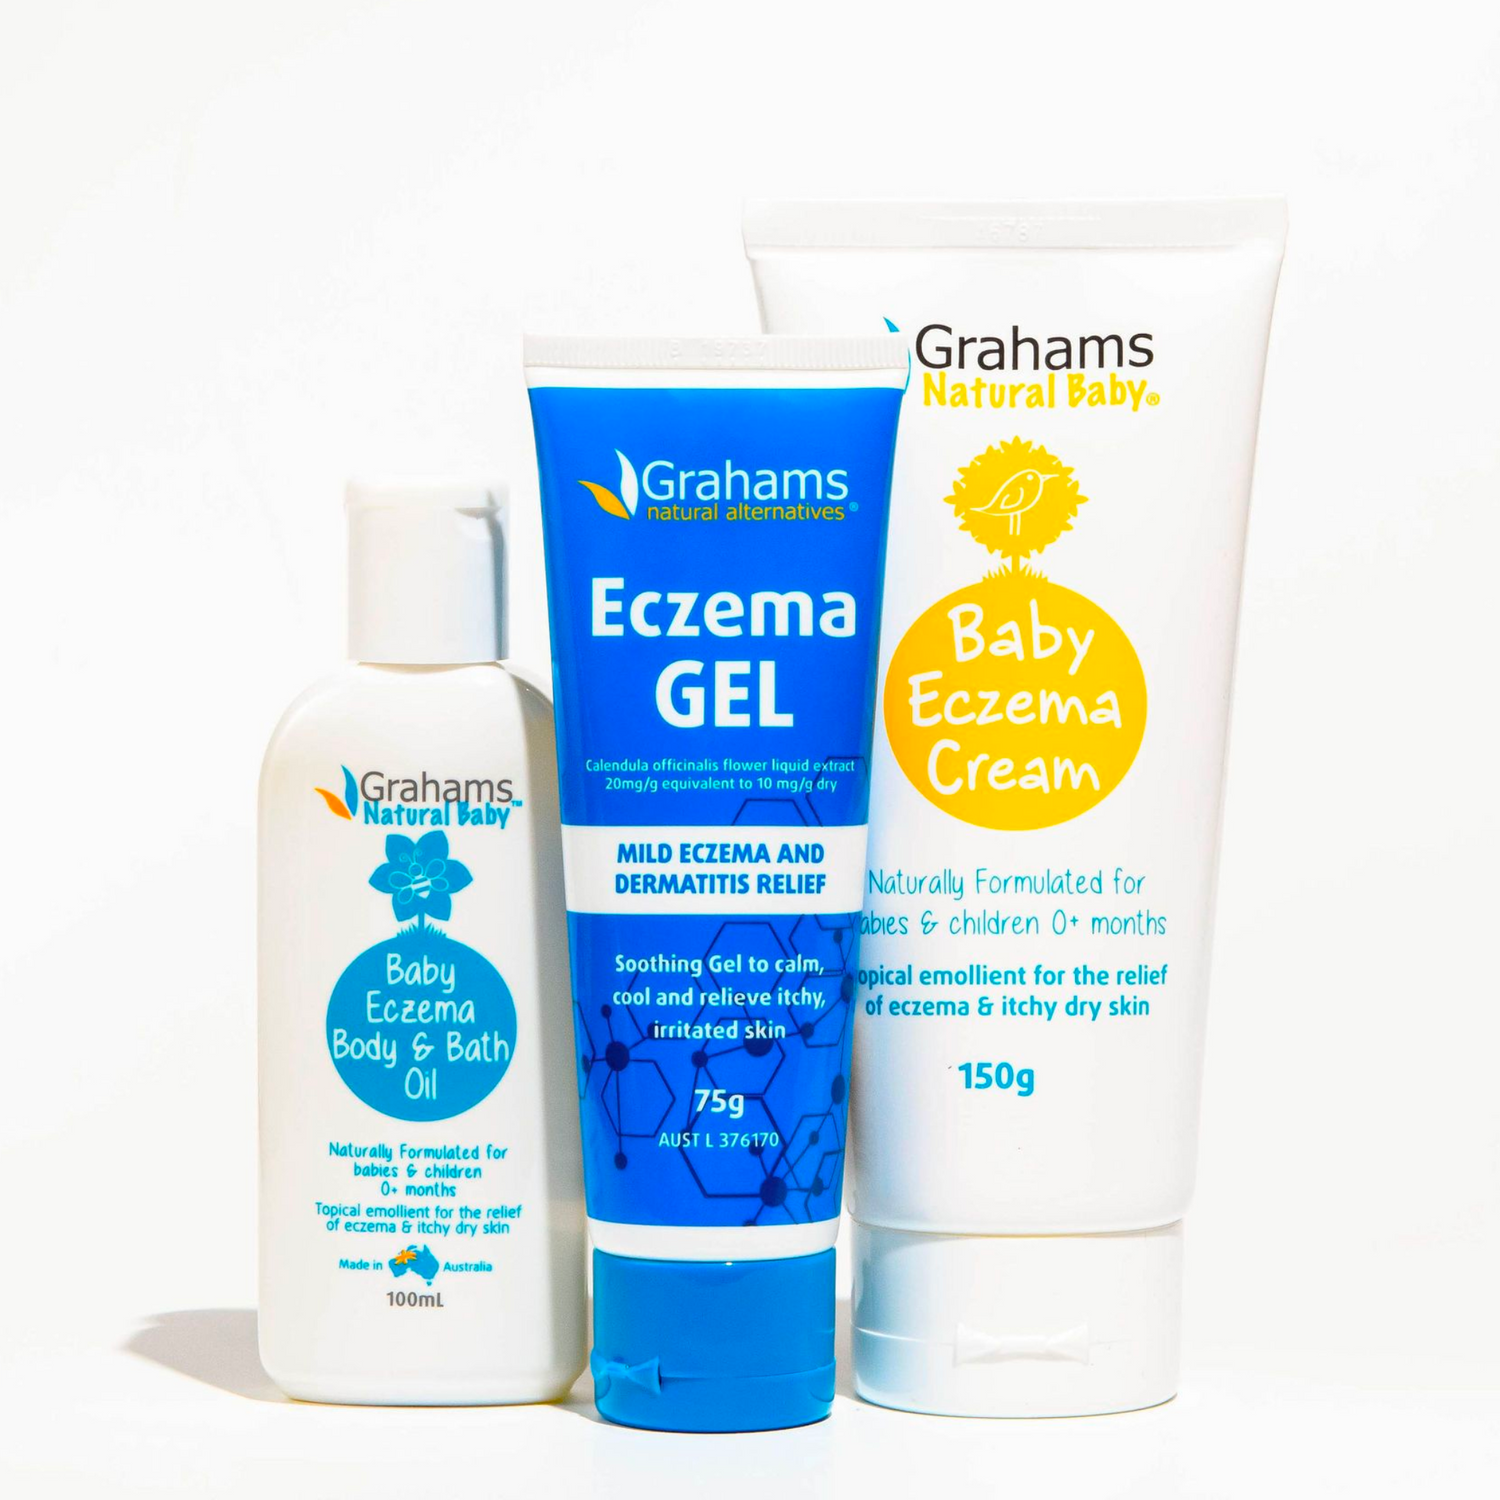 Baby Eczema Pack *Limited Edition*